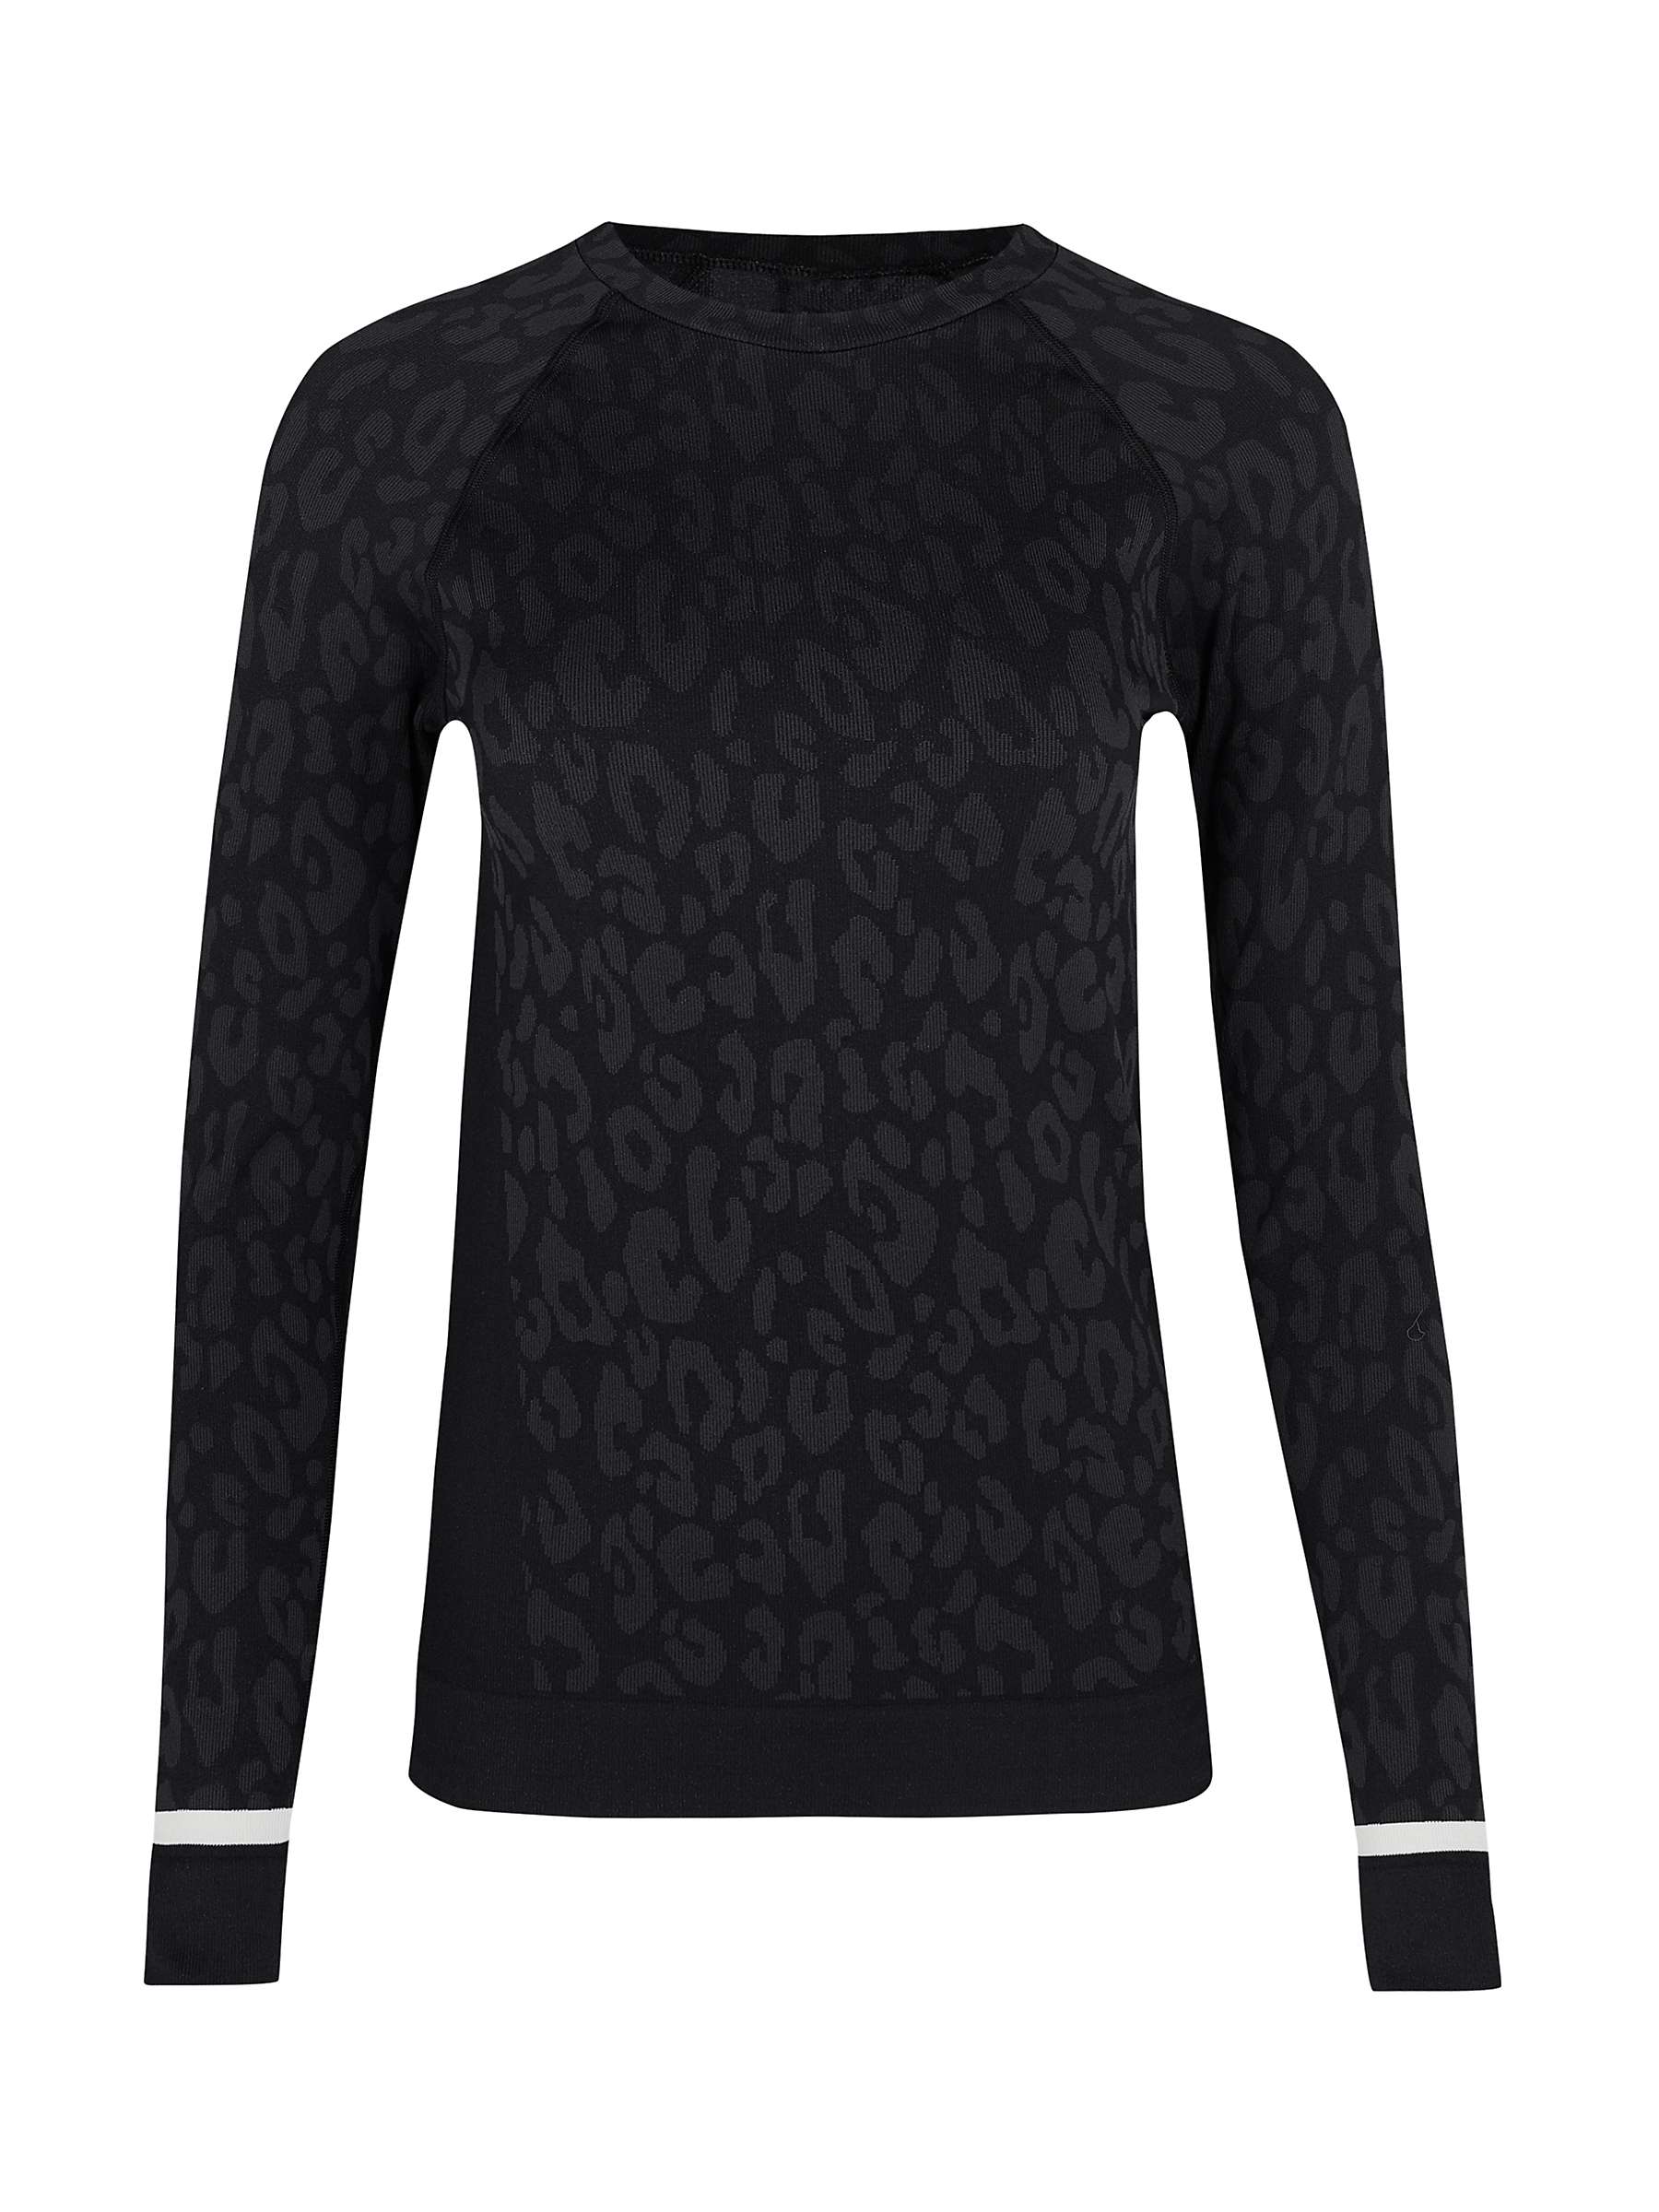 Buy Sweaty Betty Leopard Jacquard Base Layer Top Online at johnlewis.com